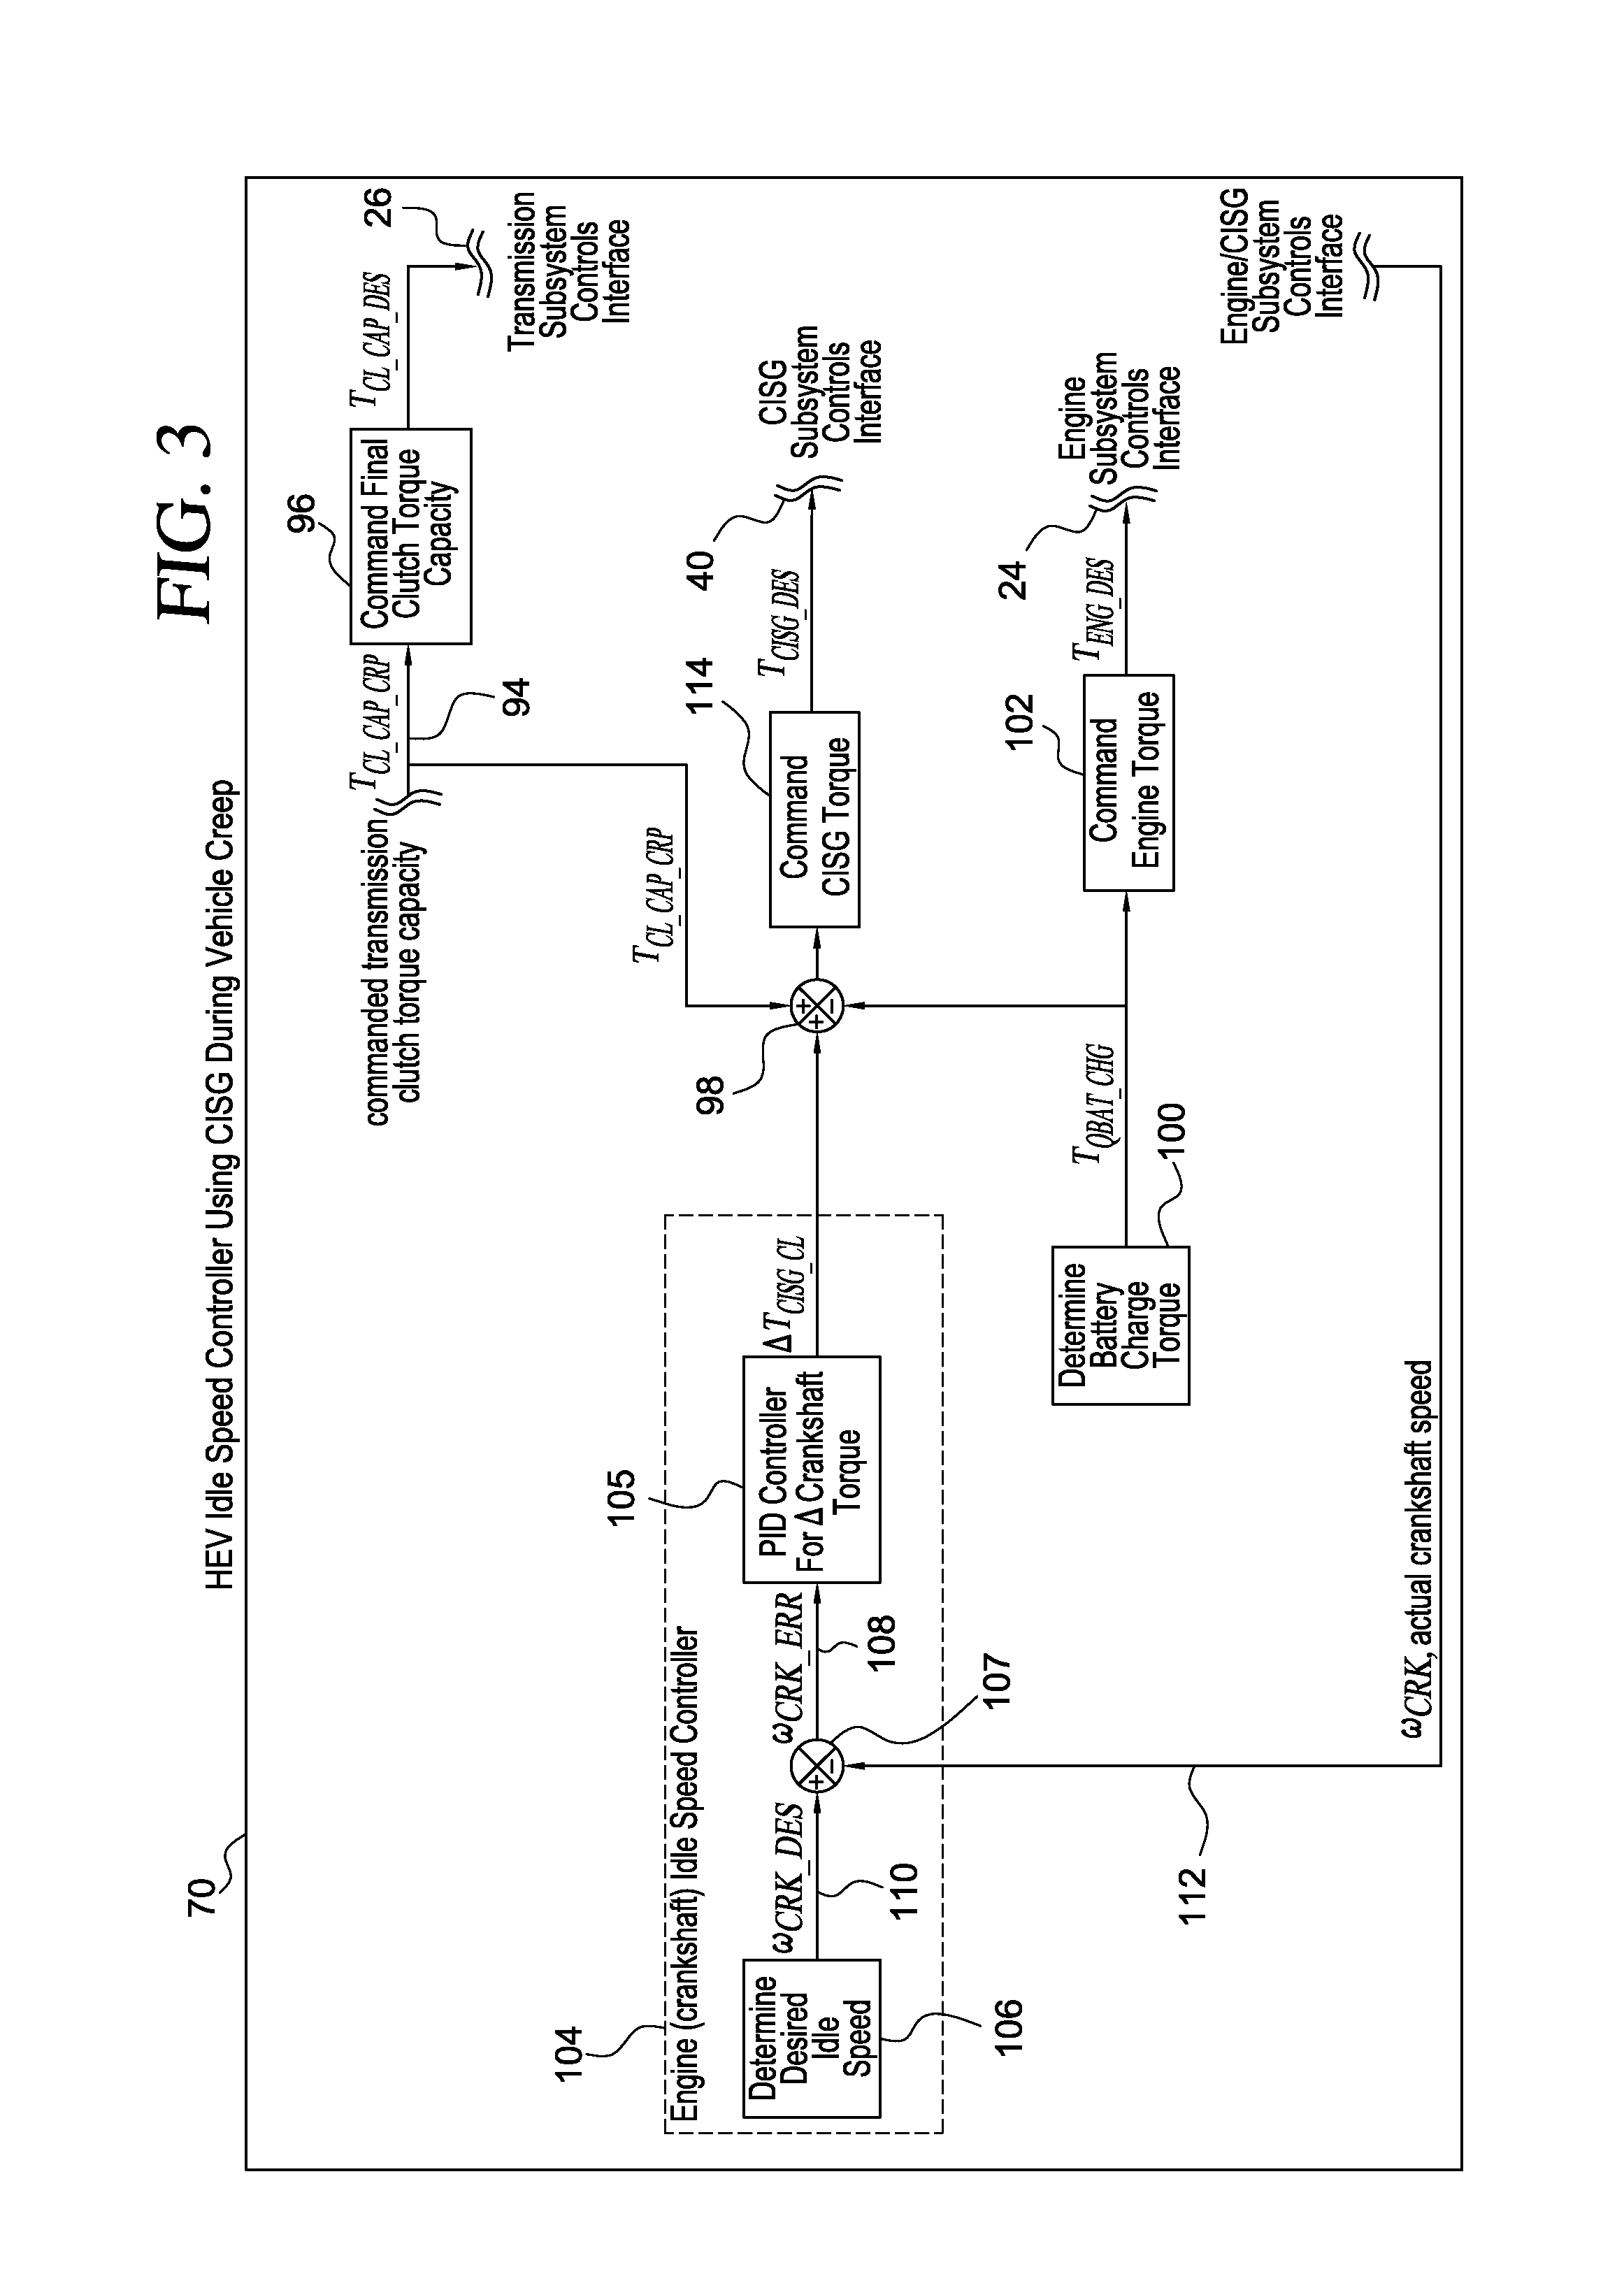 Idle Speed Control of a Hybrid Electric Vehicle